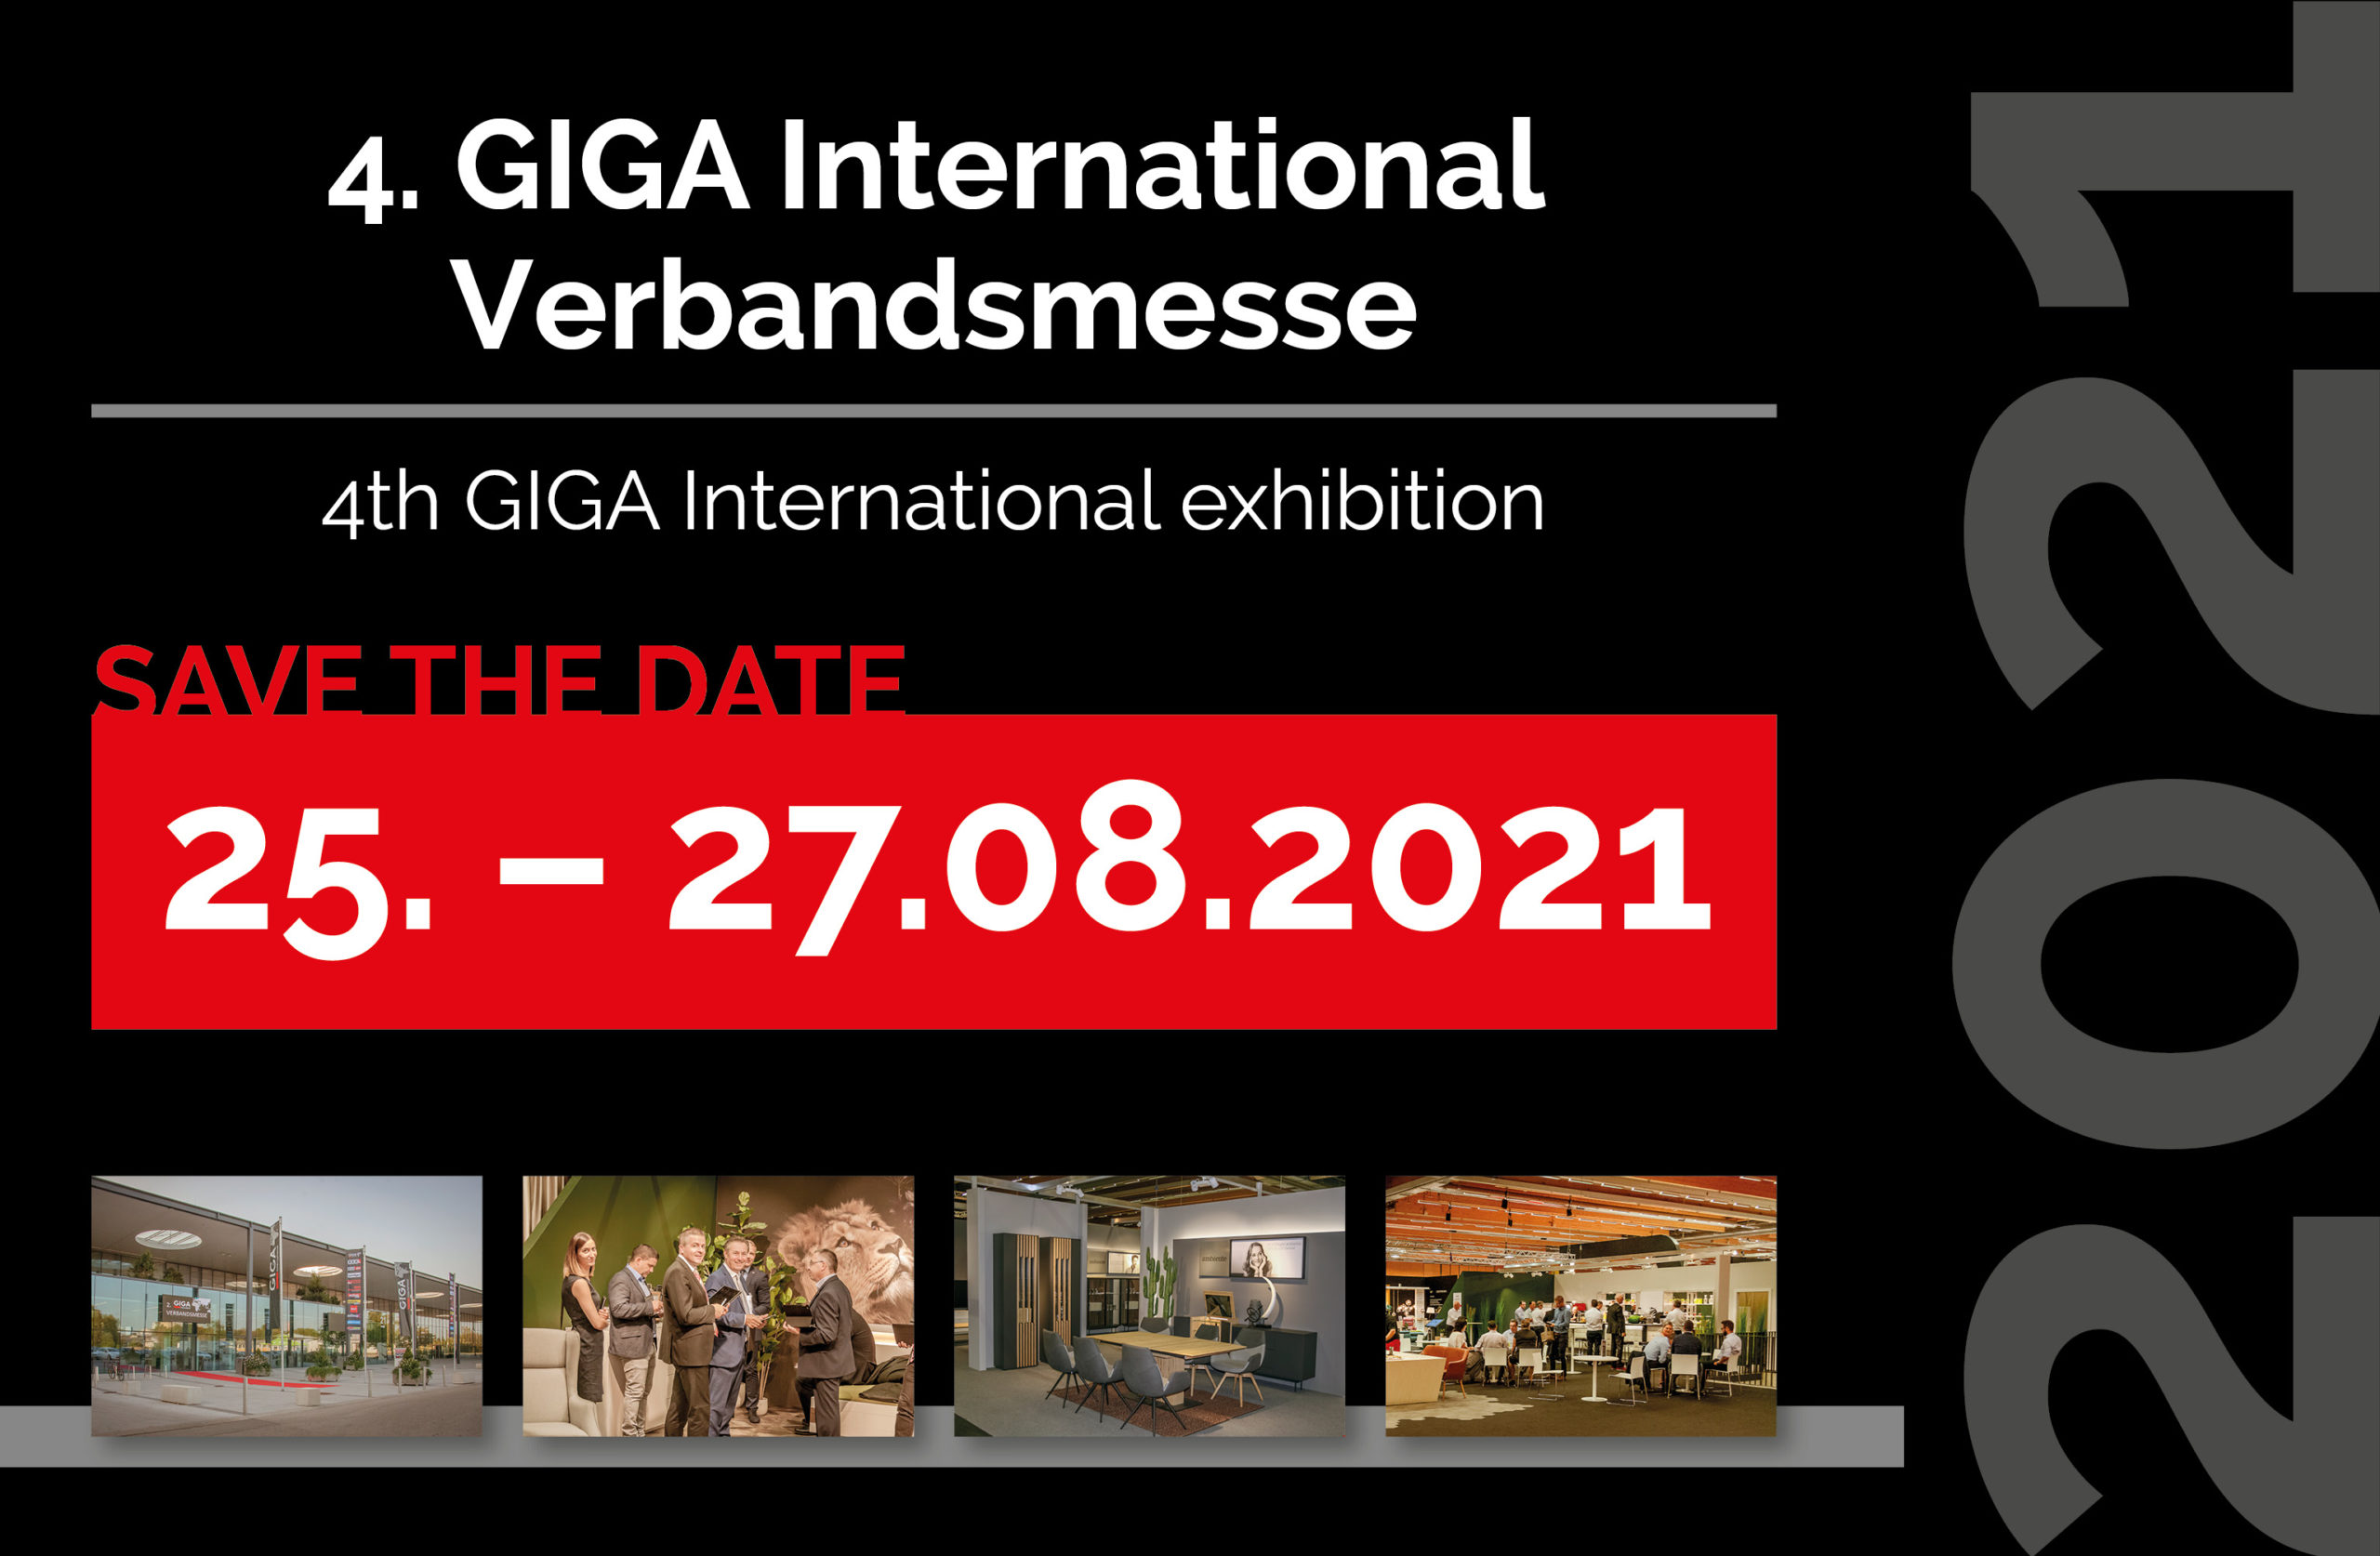 Save the date – 4th GIGA International exhibition in Wels